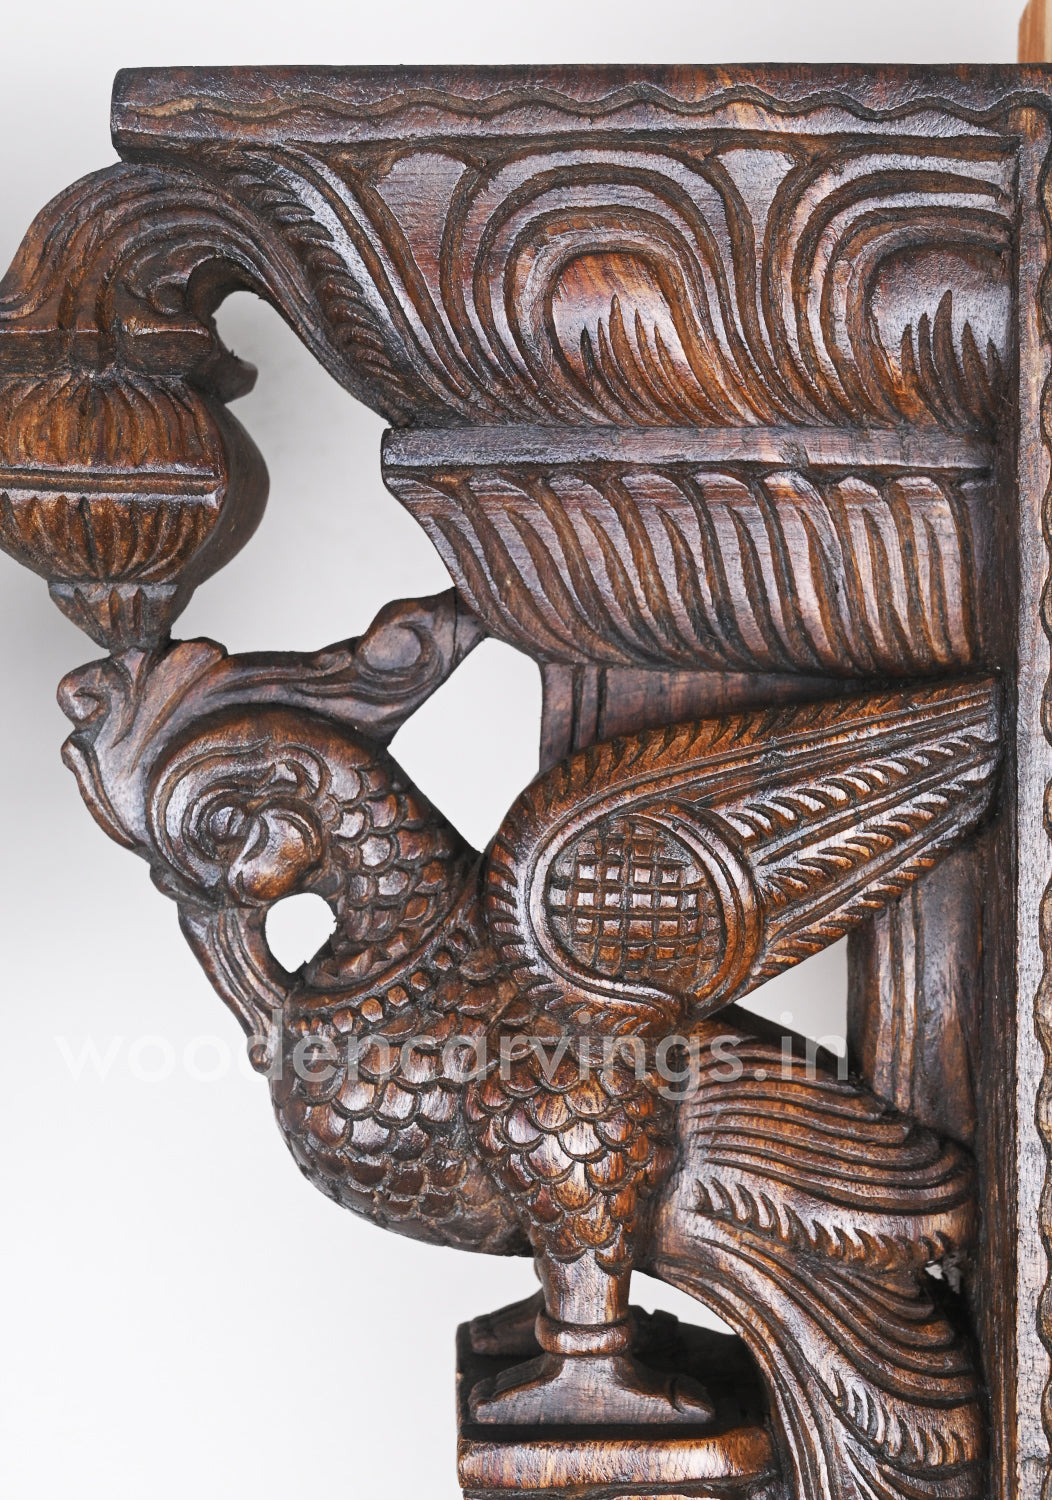 Decor For Entrances Two Parrots with Beautiful plumages Wooden Wall Brackets 18"